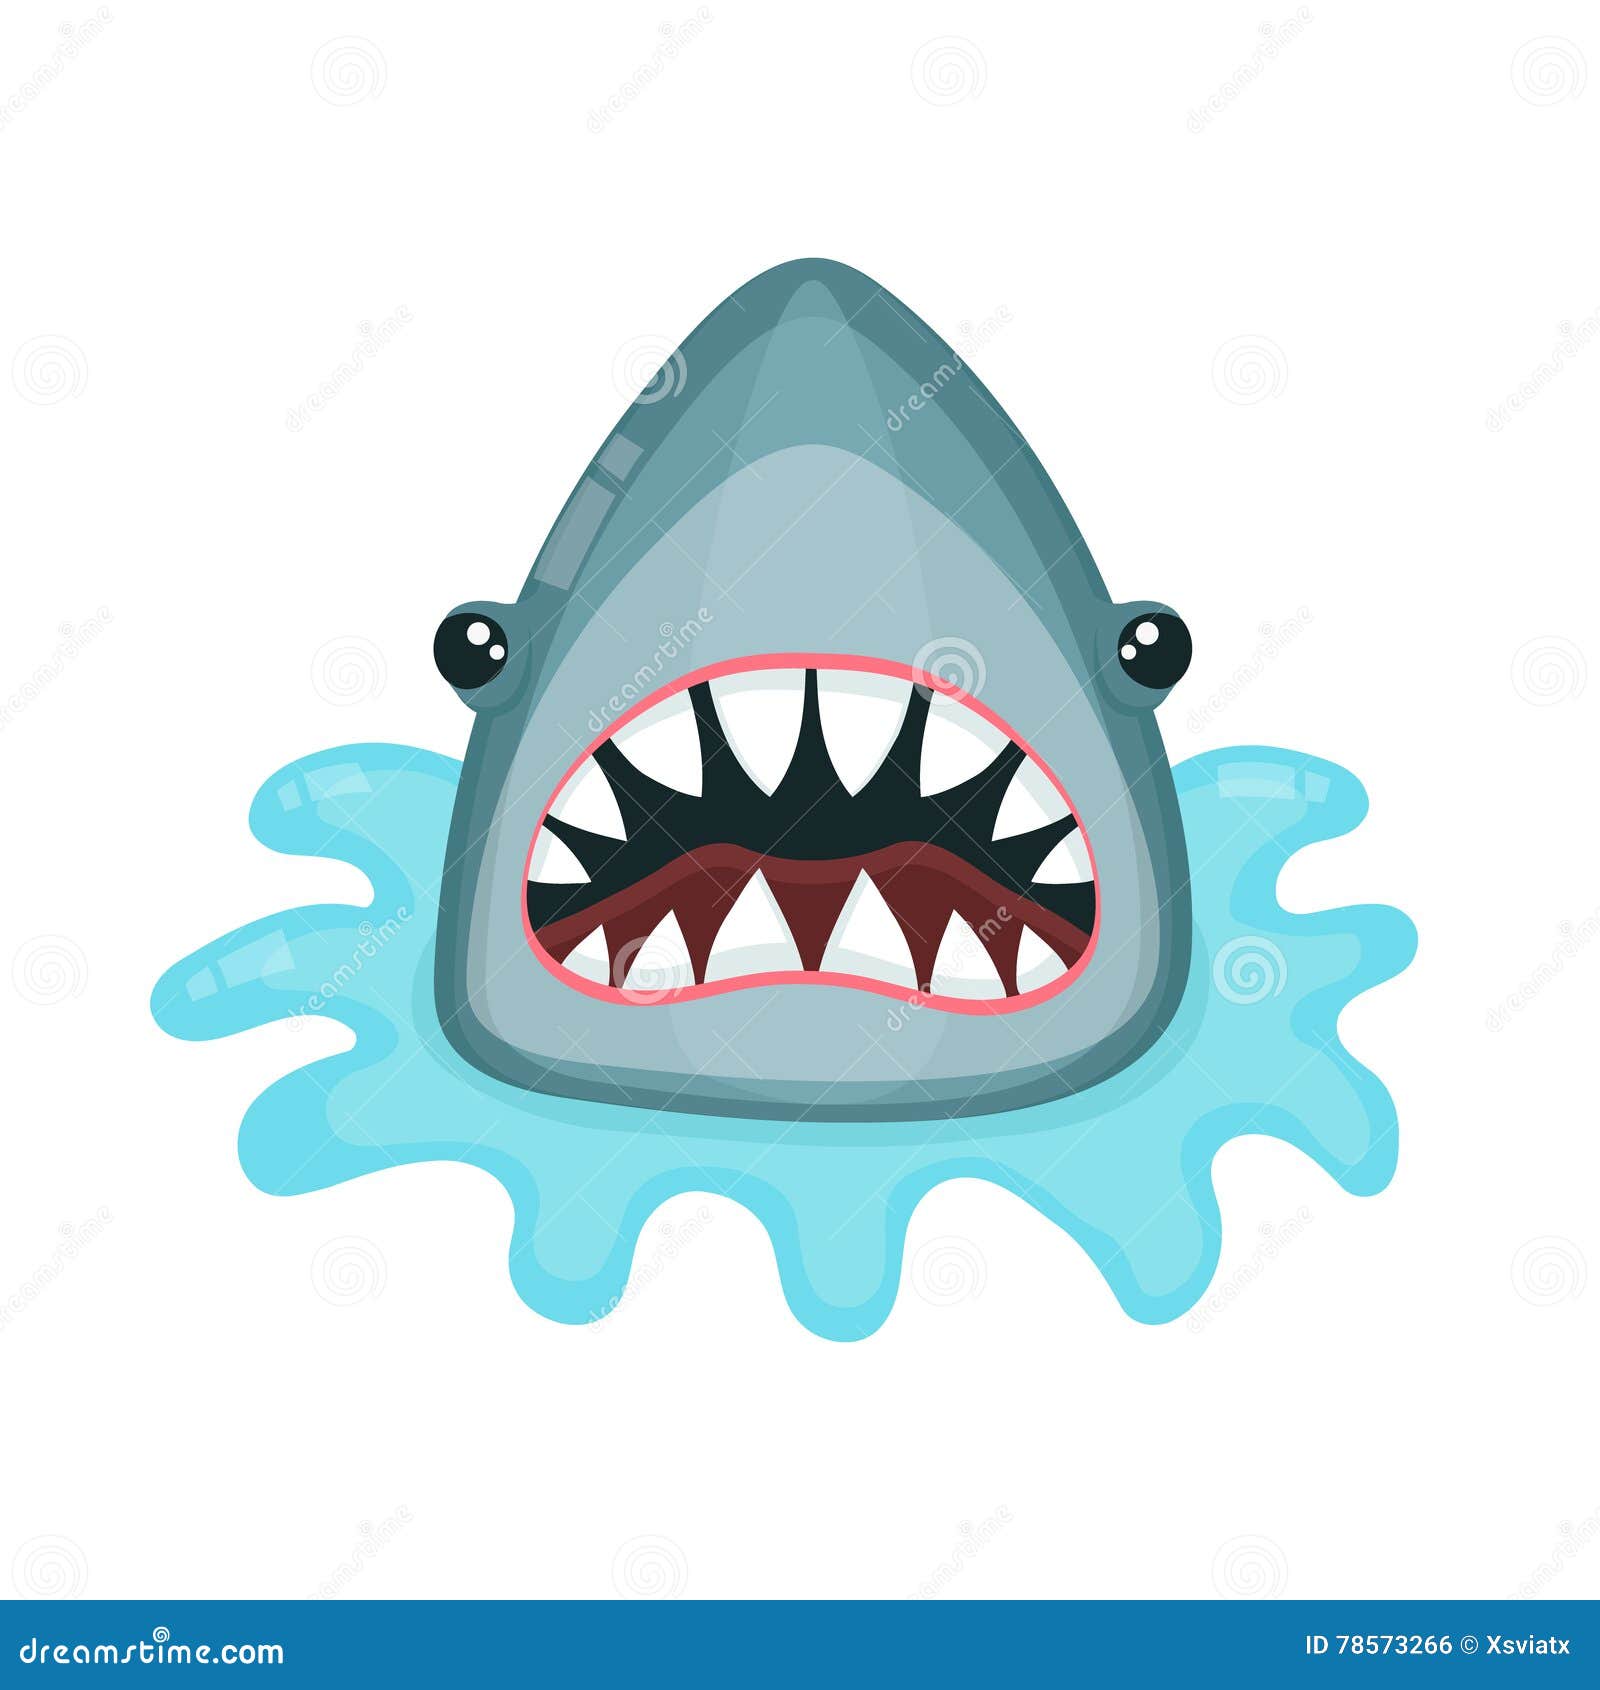 Download Angry Shark Vector Flat Illustration Stock Vector ...